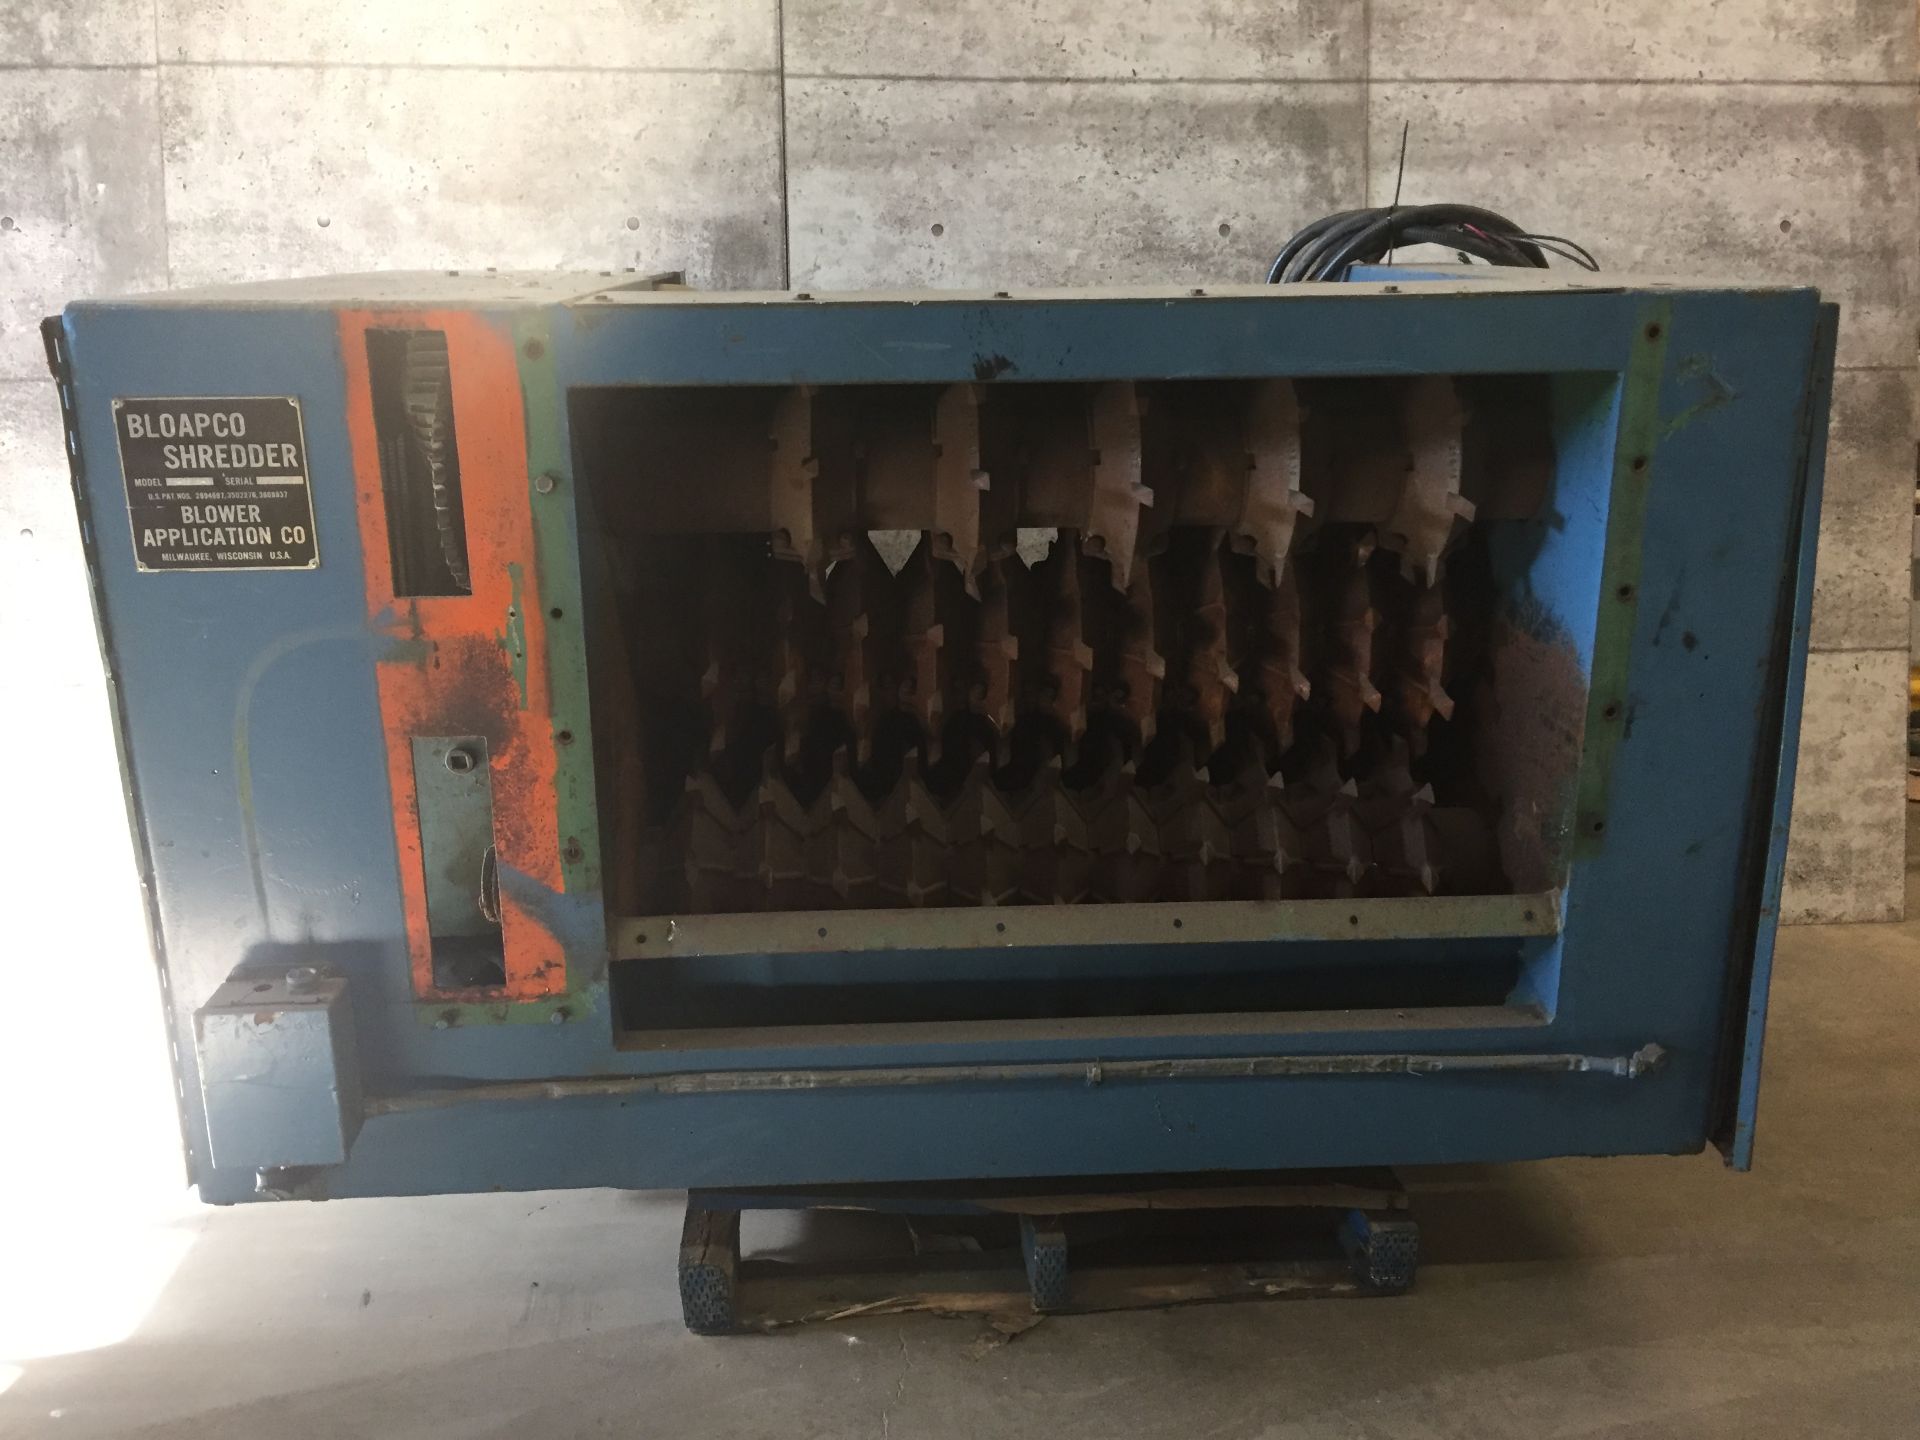 BLOAPCO (MODEL #3C-2548-B) SHREDDER WITH 1" CORES AND CARDBOARD - SERIAL #73584